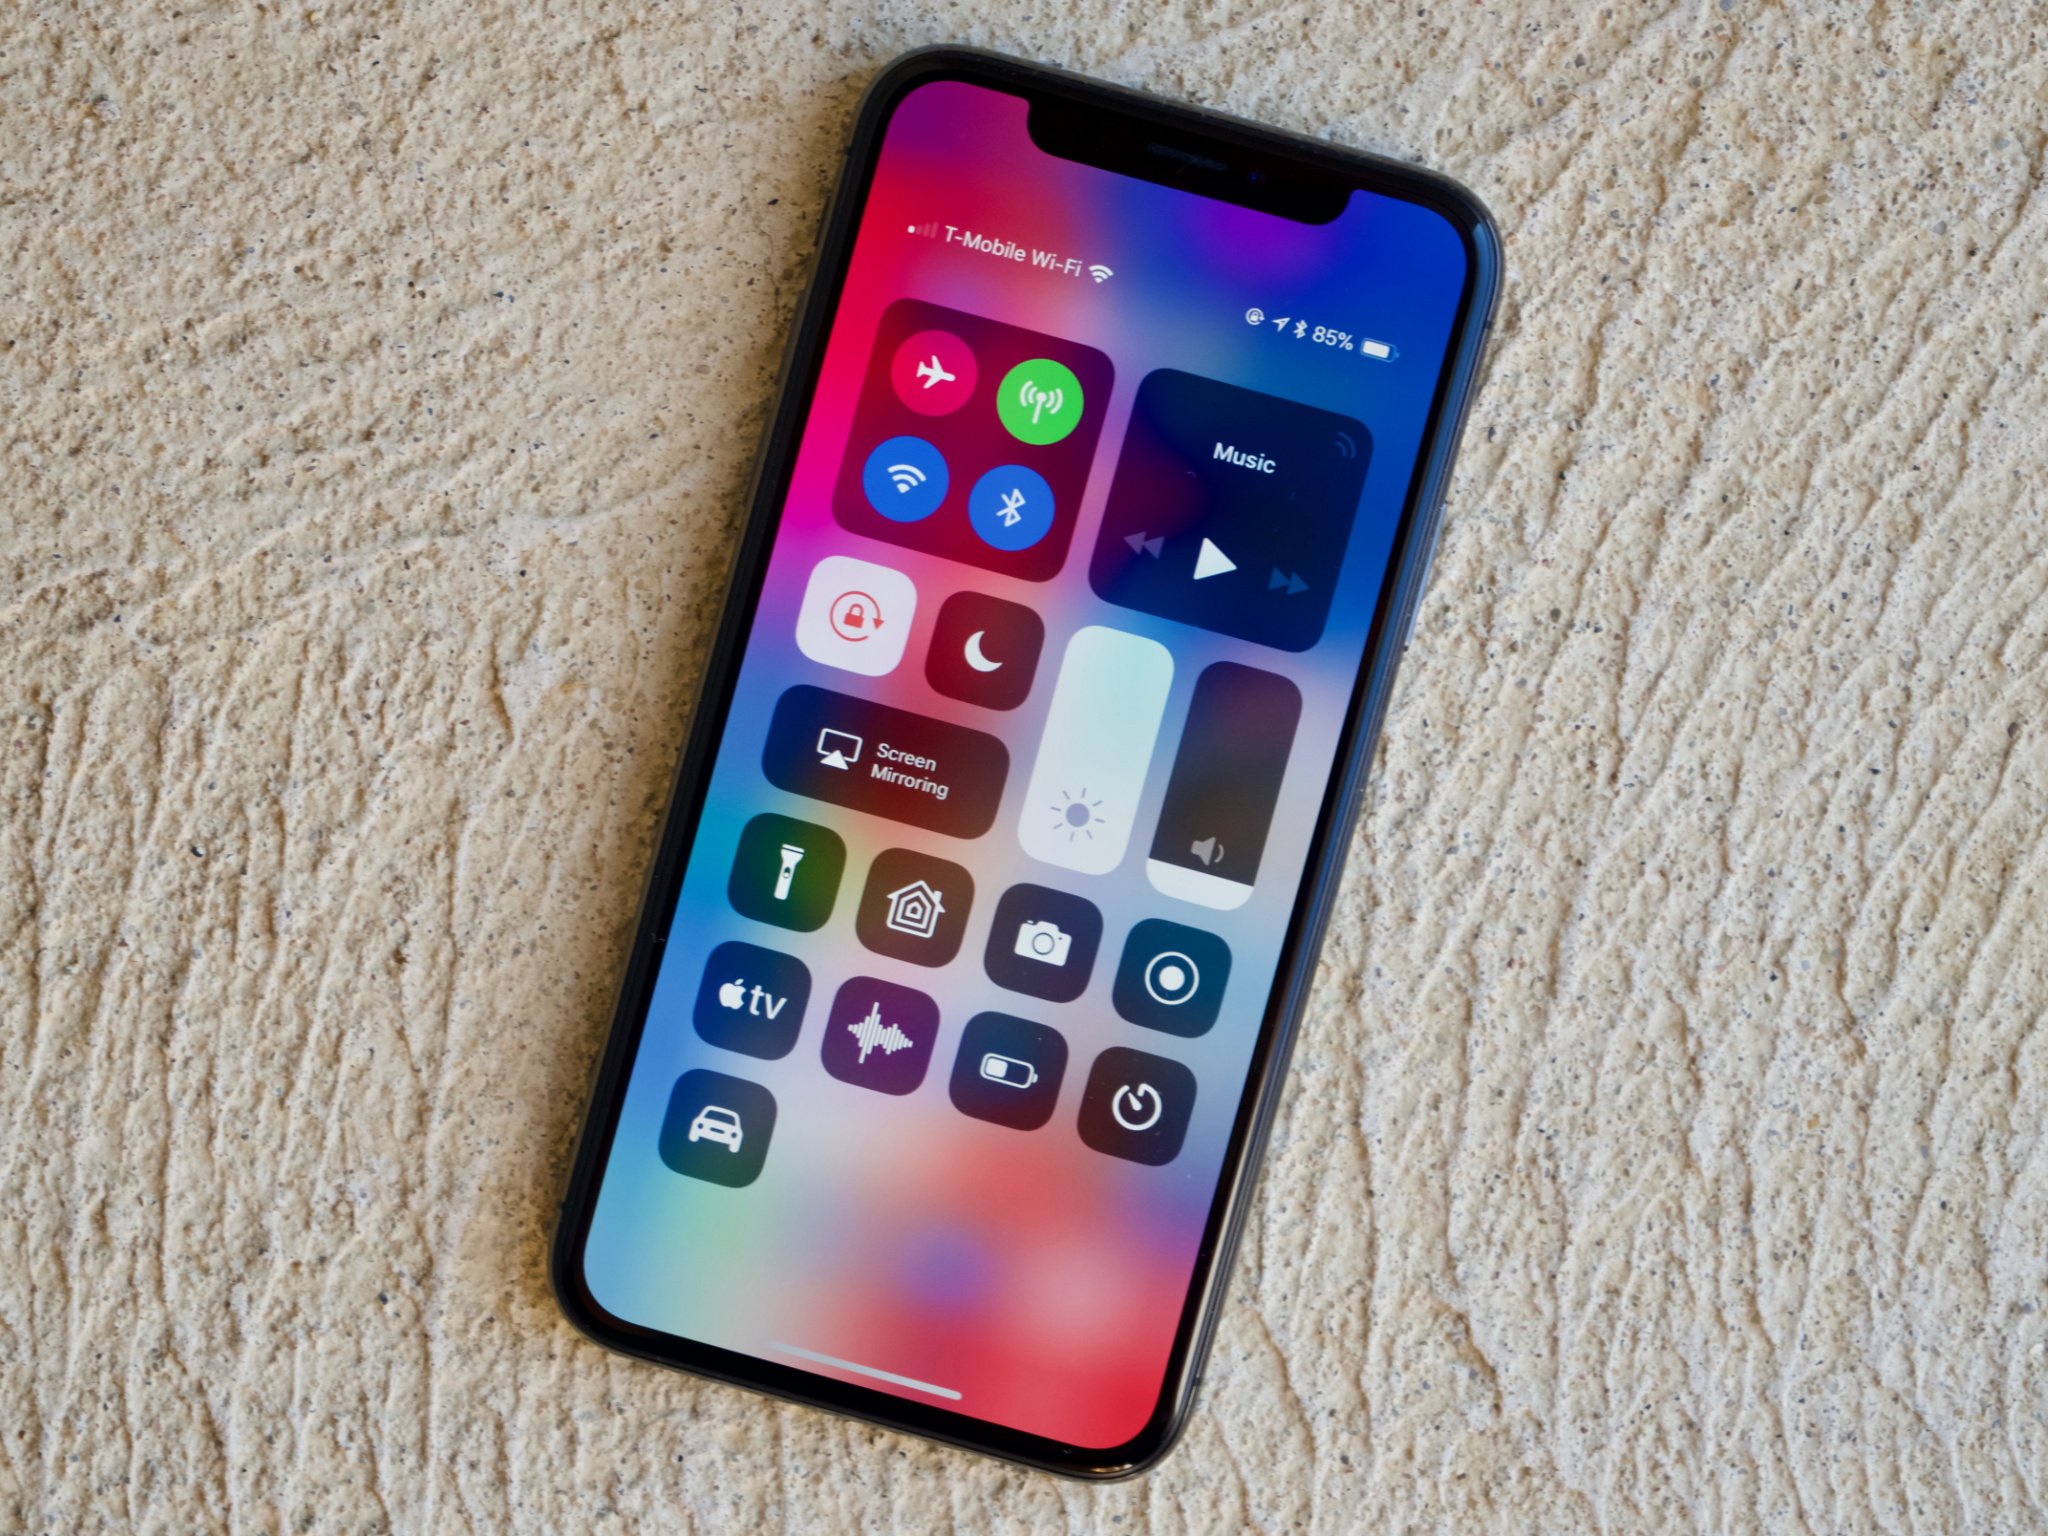 What can the iPhone X Spyware (No Jailbreak) do for you?